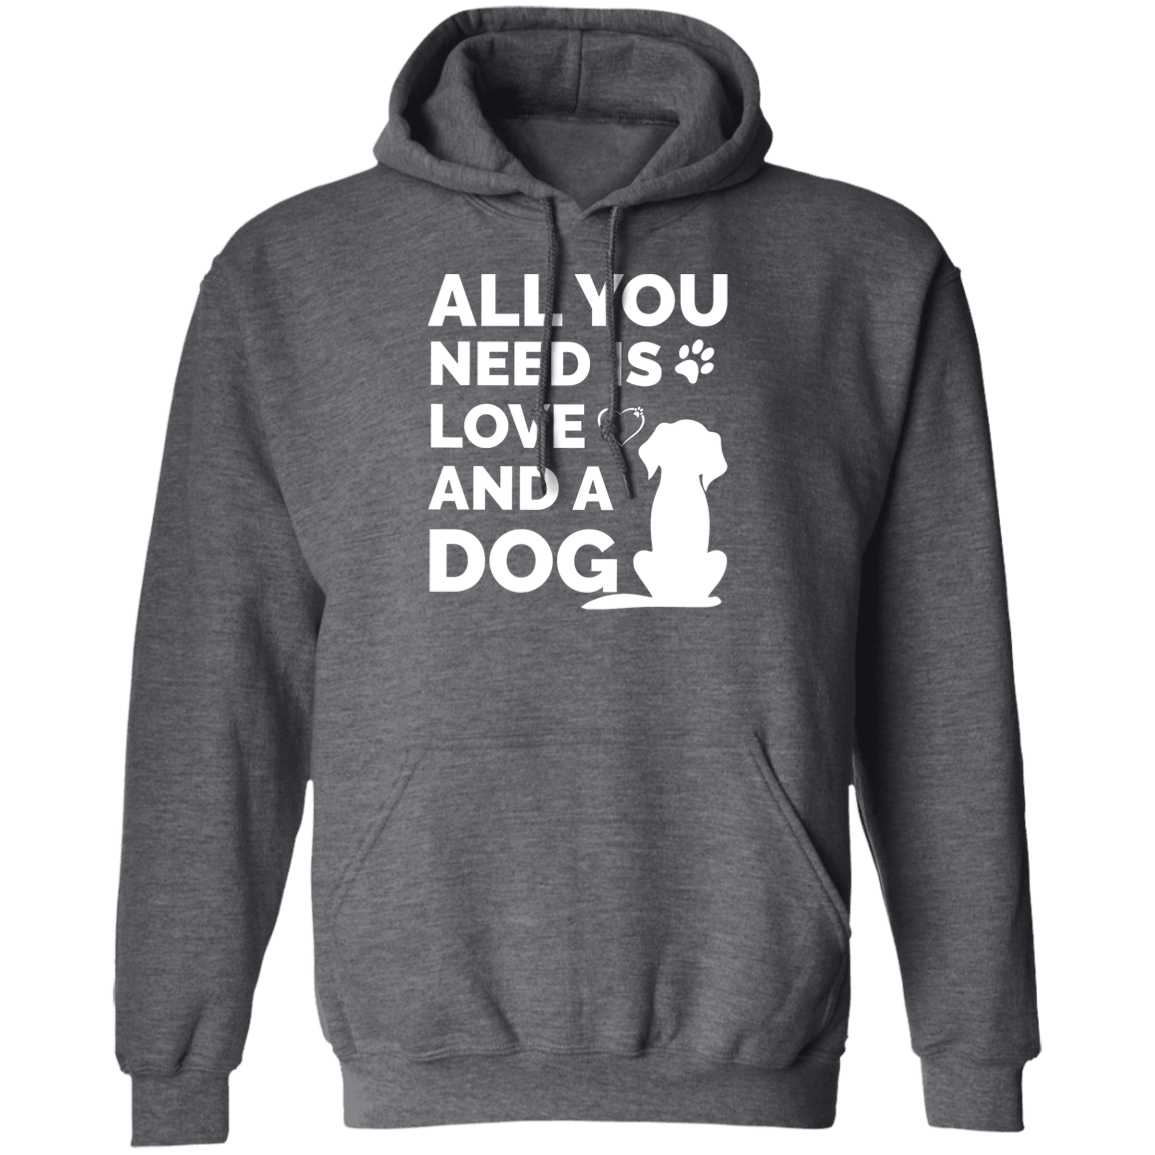 All You Need Is Love And A Dog - Hoodie.